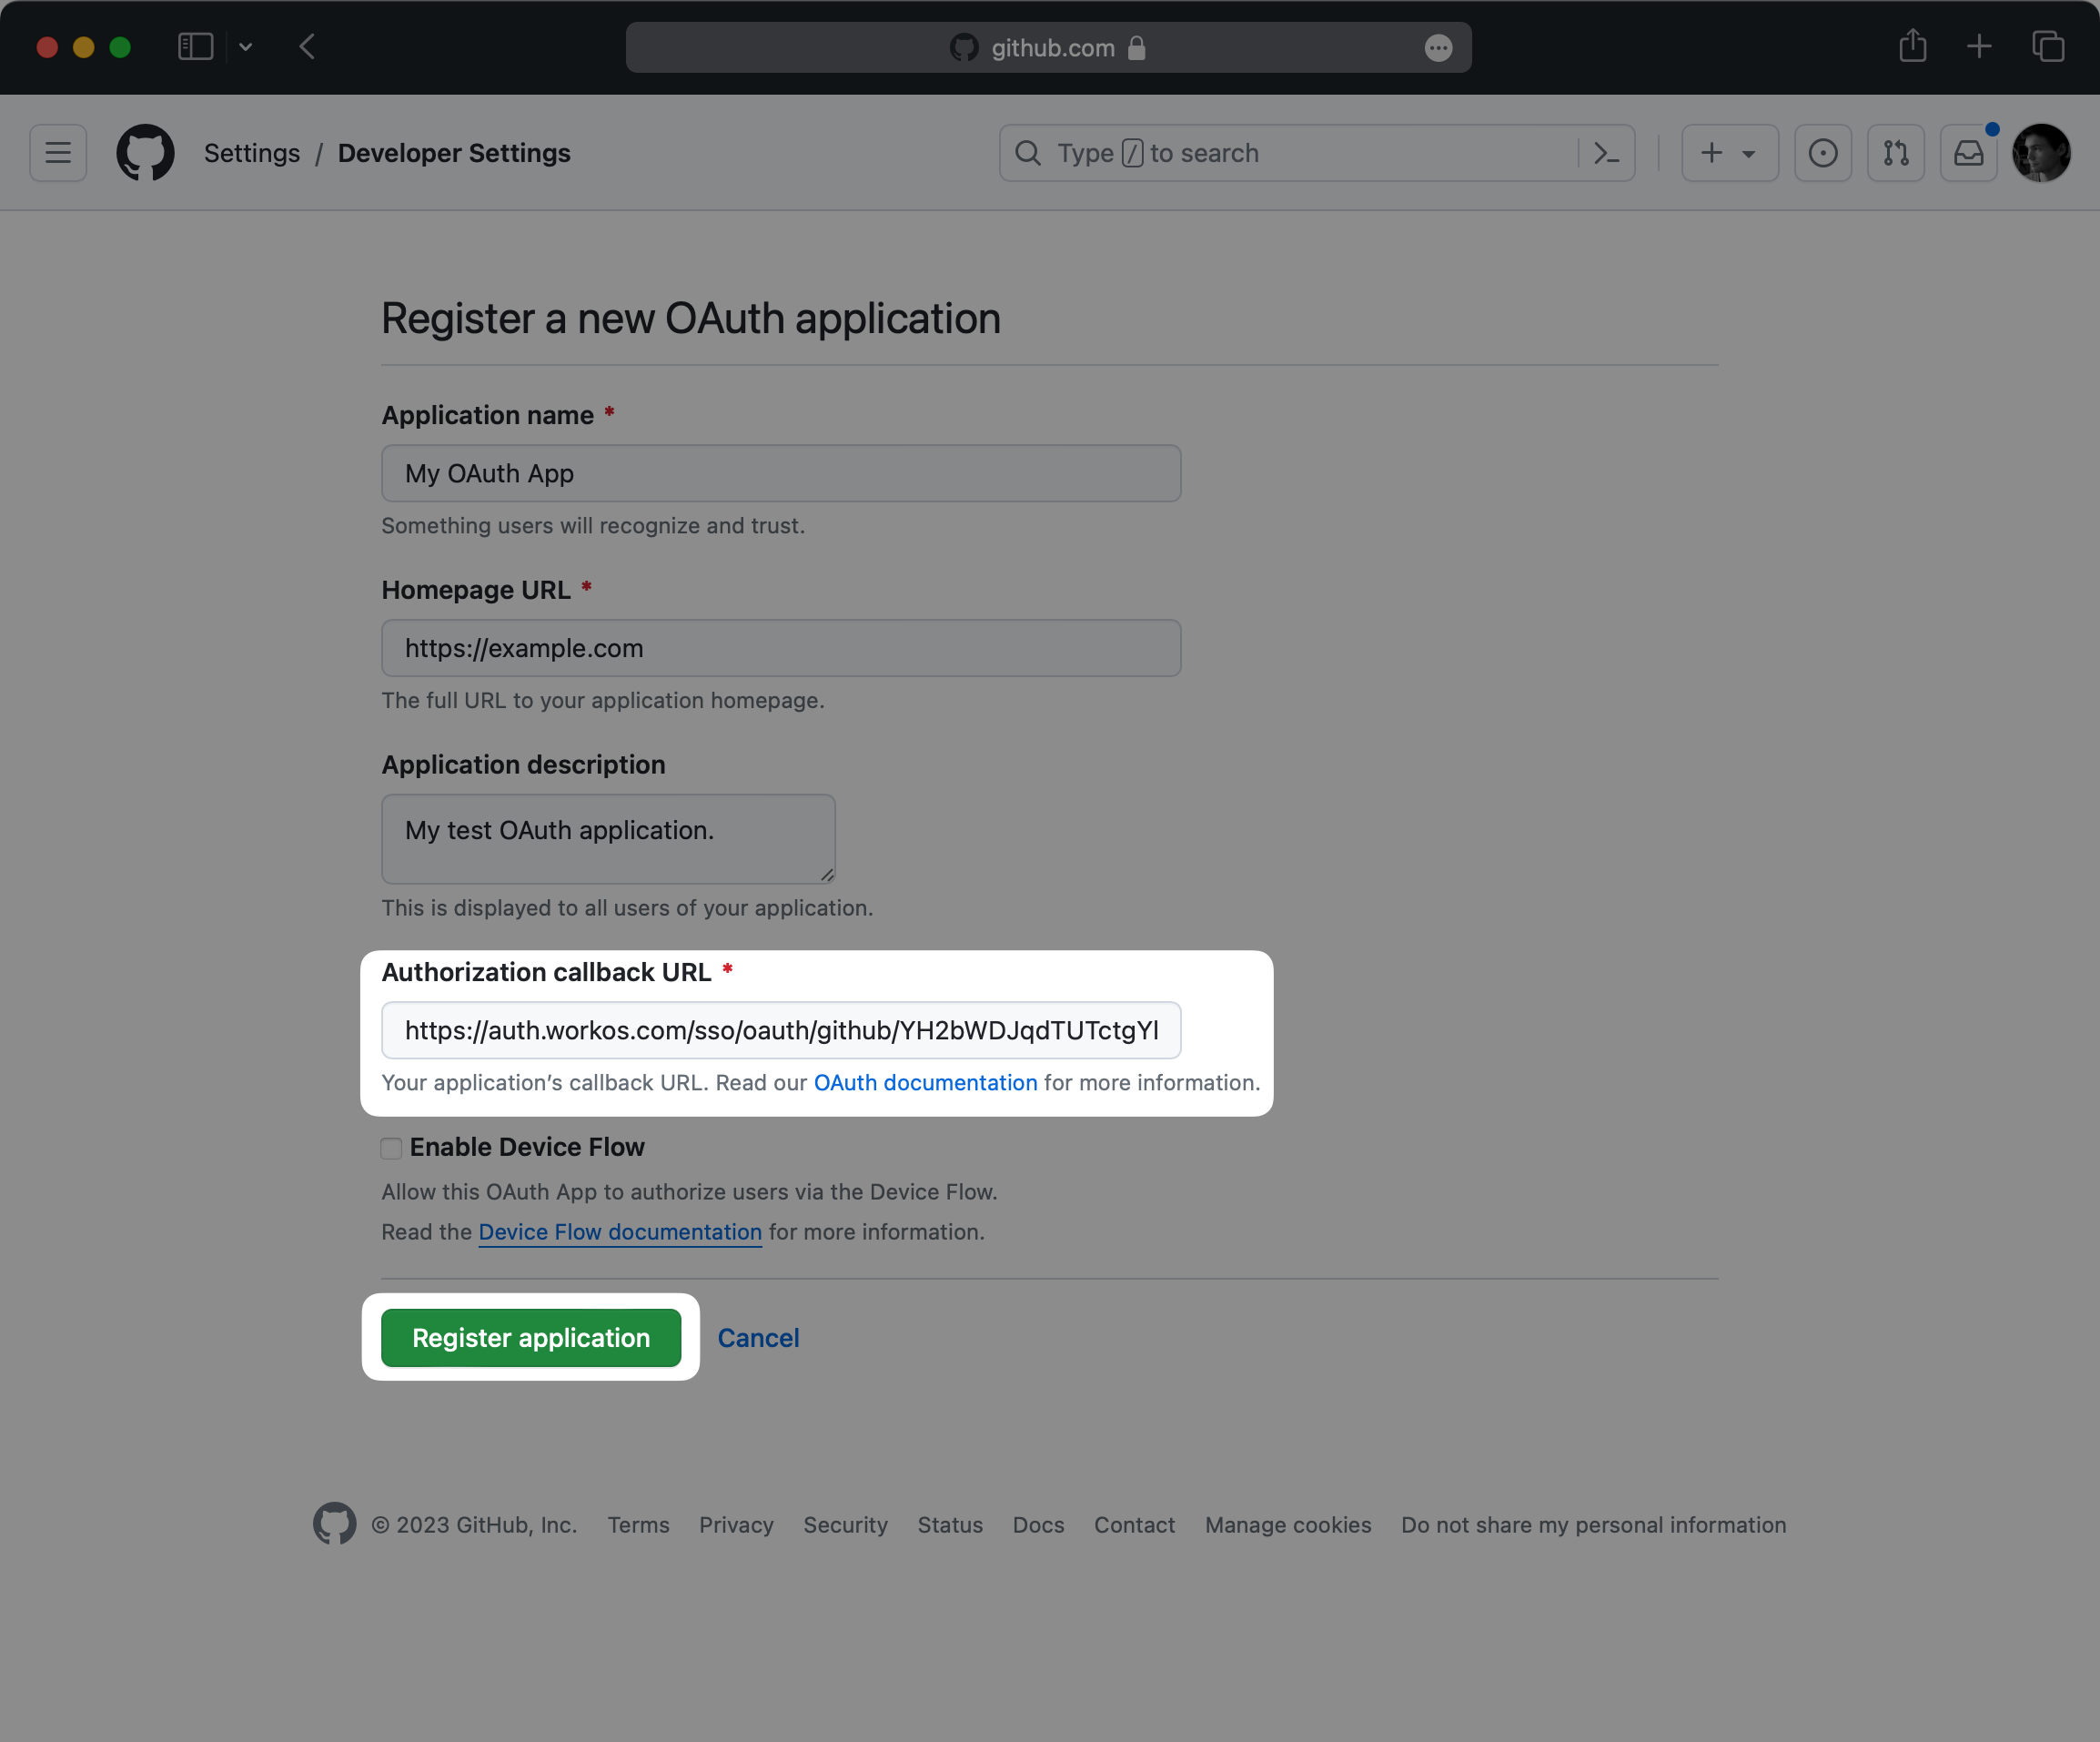 A screenshot showing the GitHub form to create a new OAuth application.